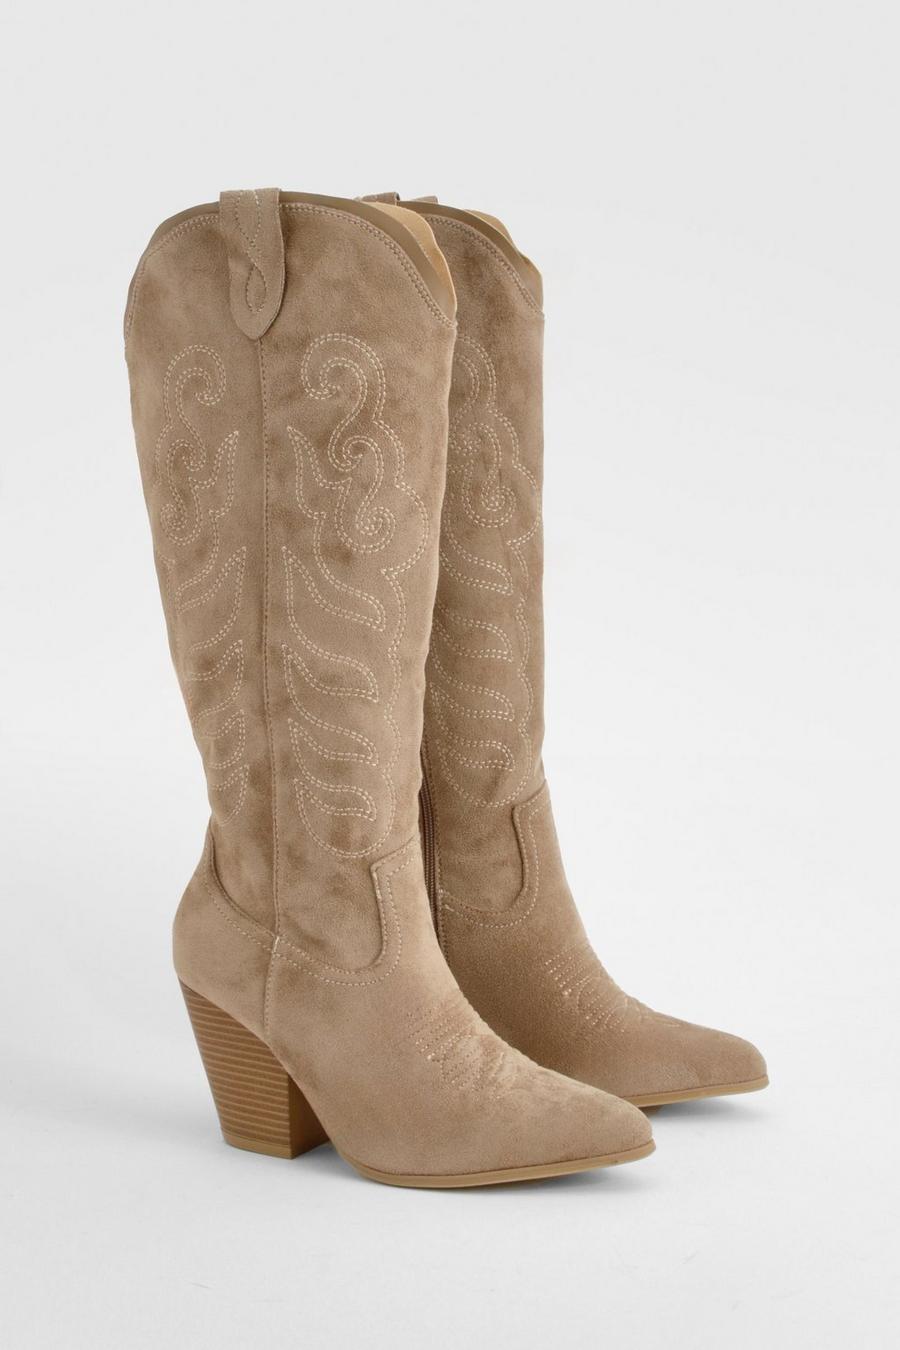 Taupe Embroidered Knee High Western Cowboy Boots